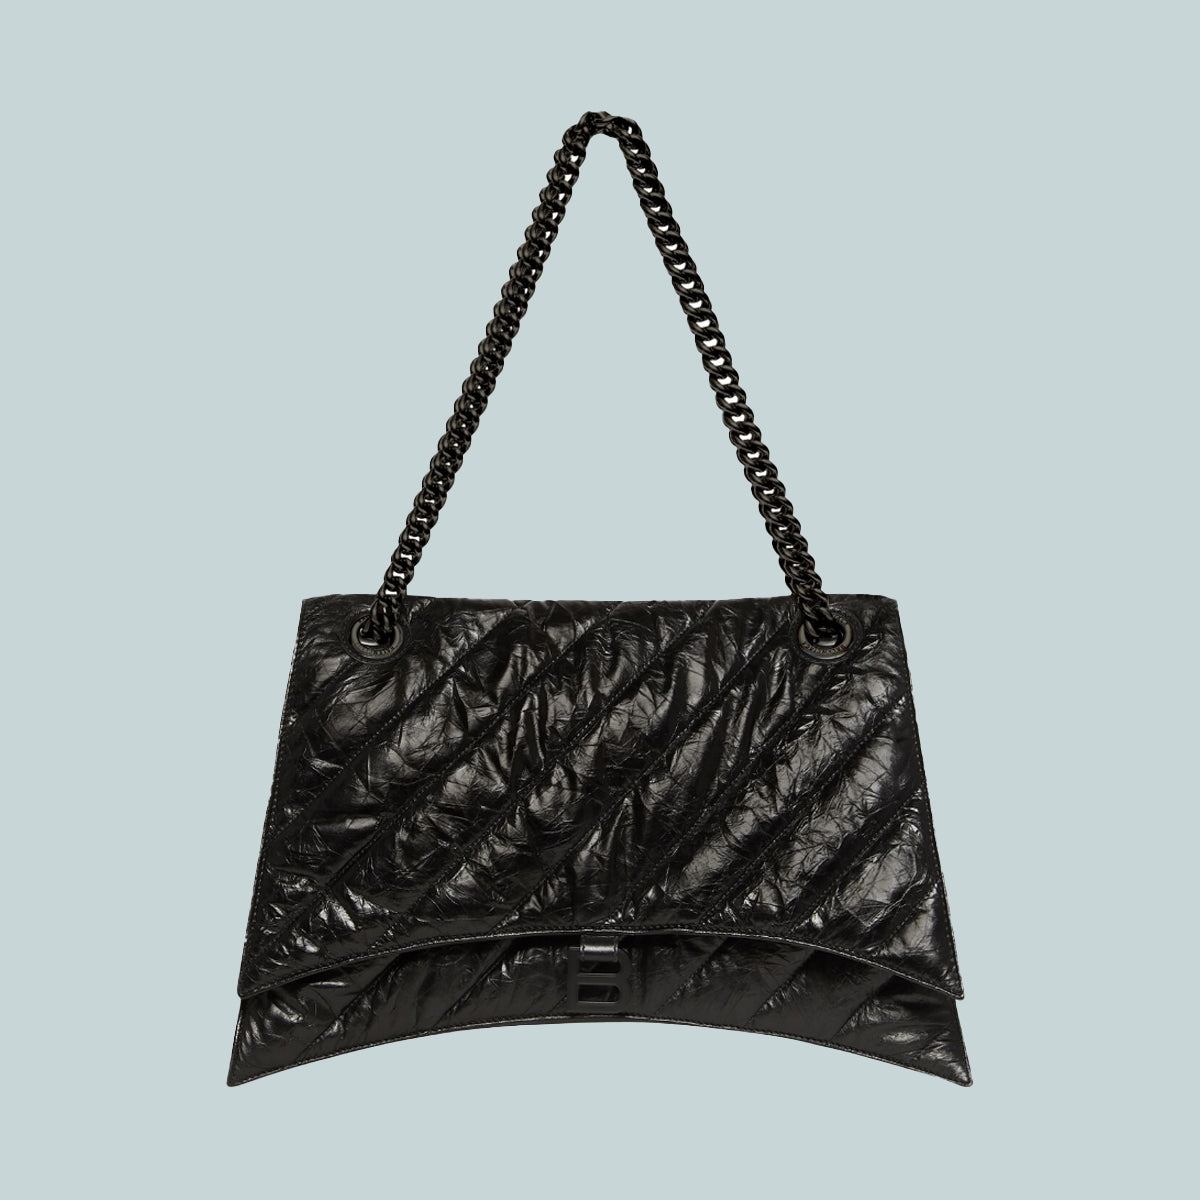 Crush large chain bag quilted in black